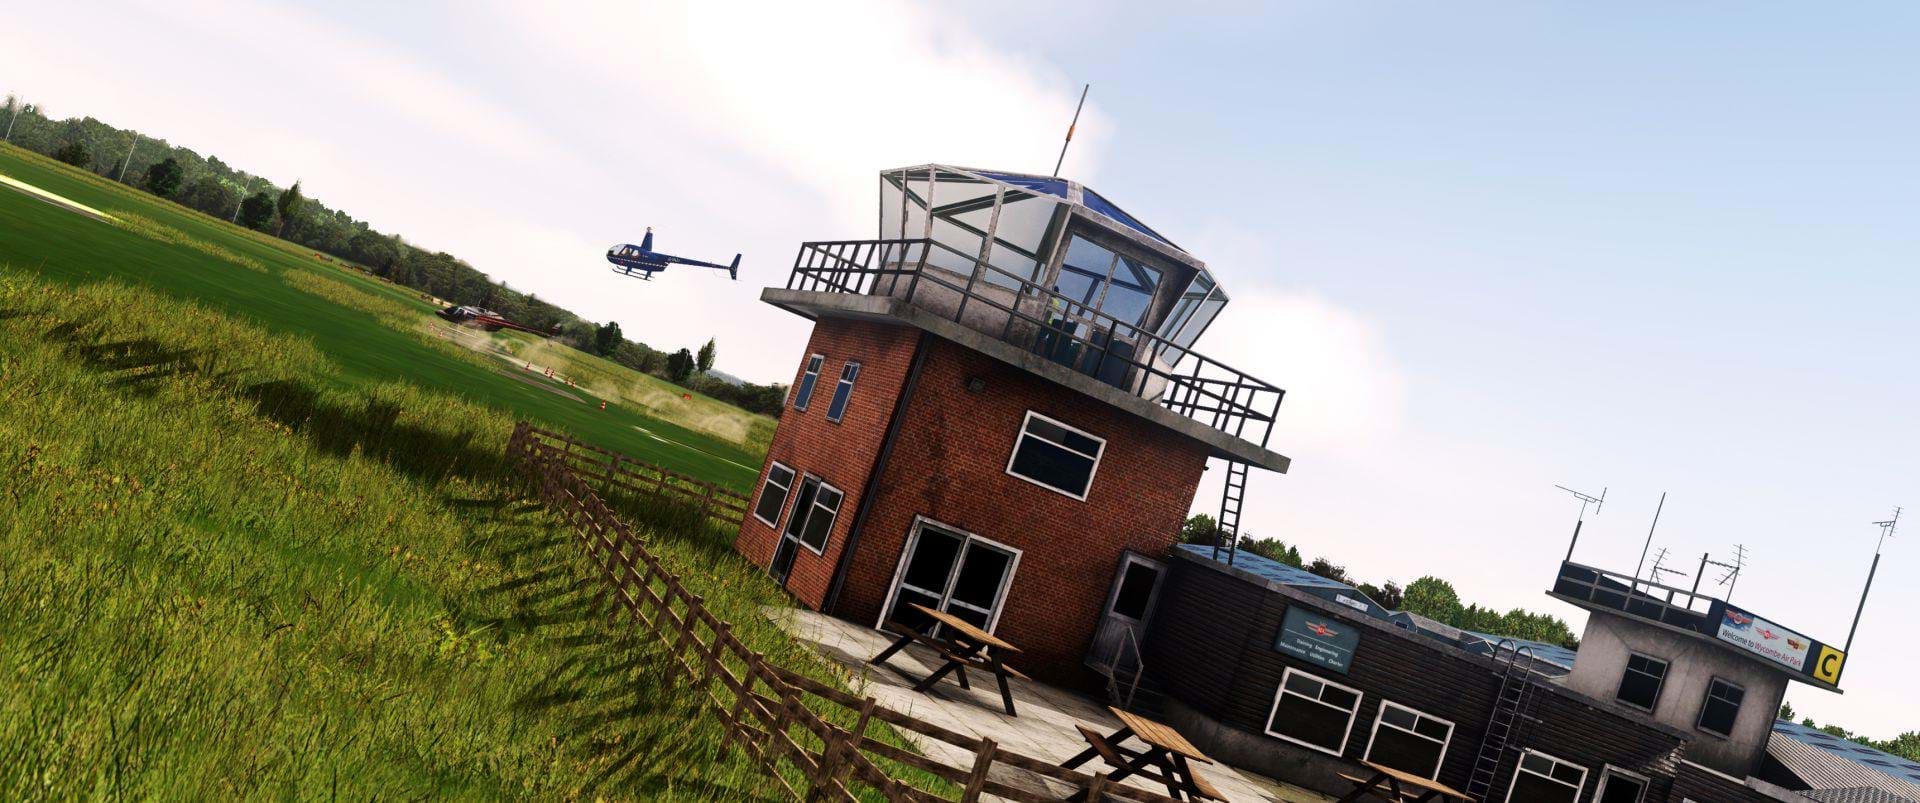 ORBX released Wycombe Air Park for P3D